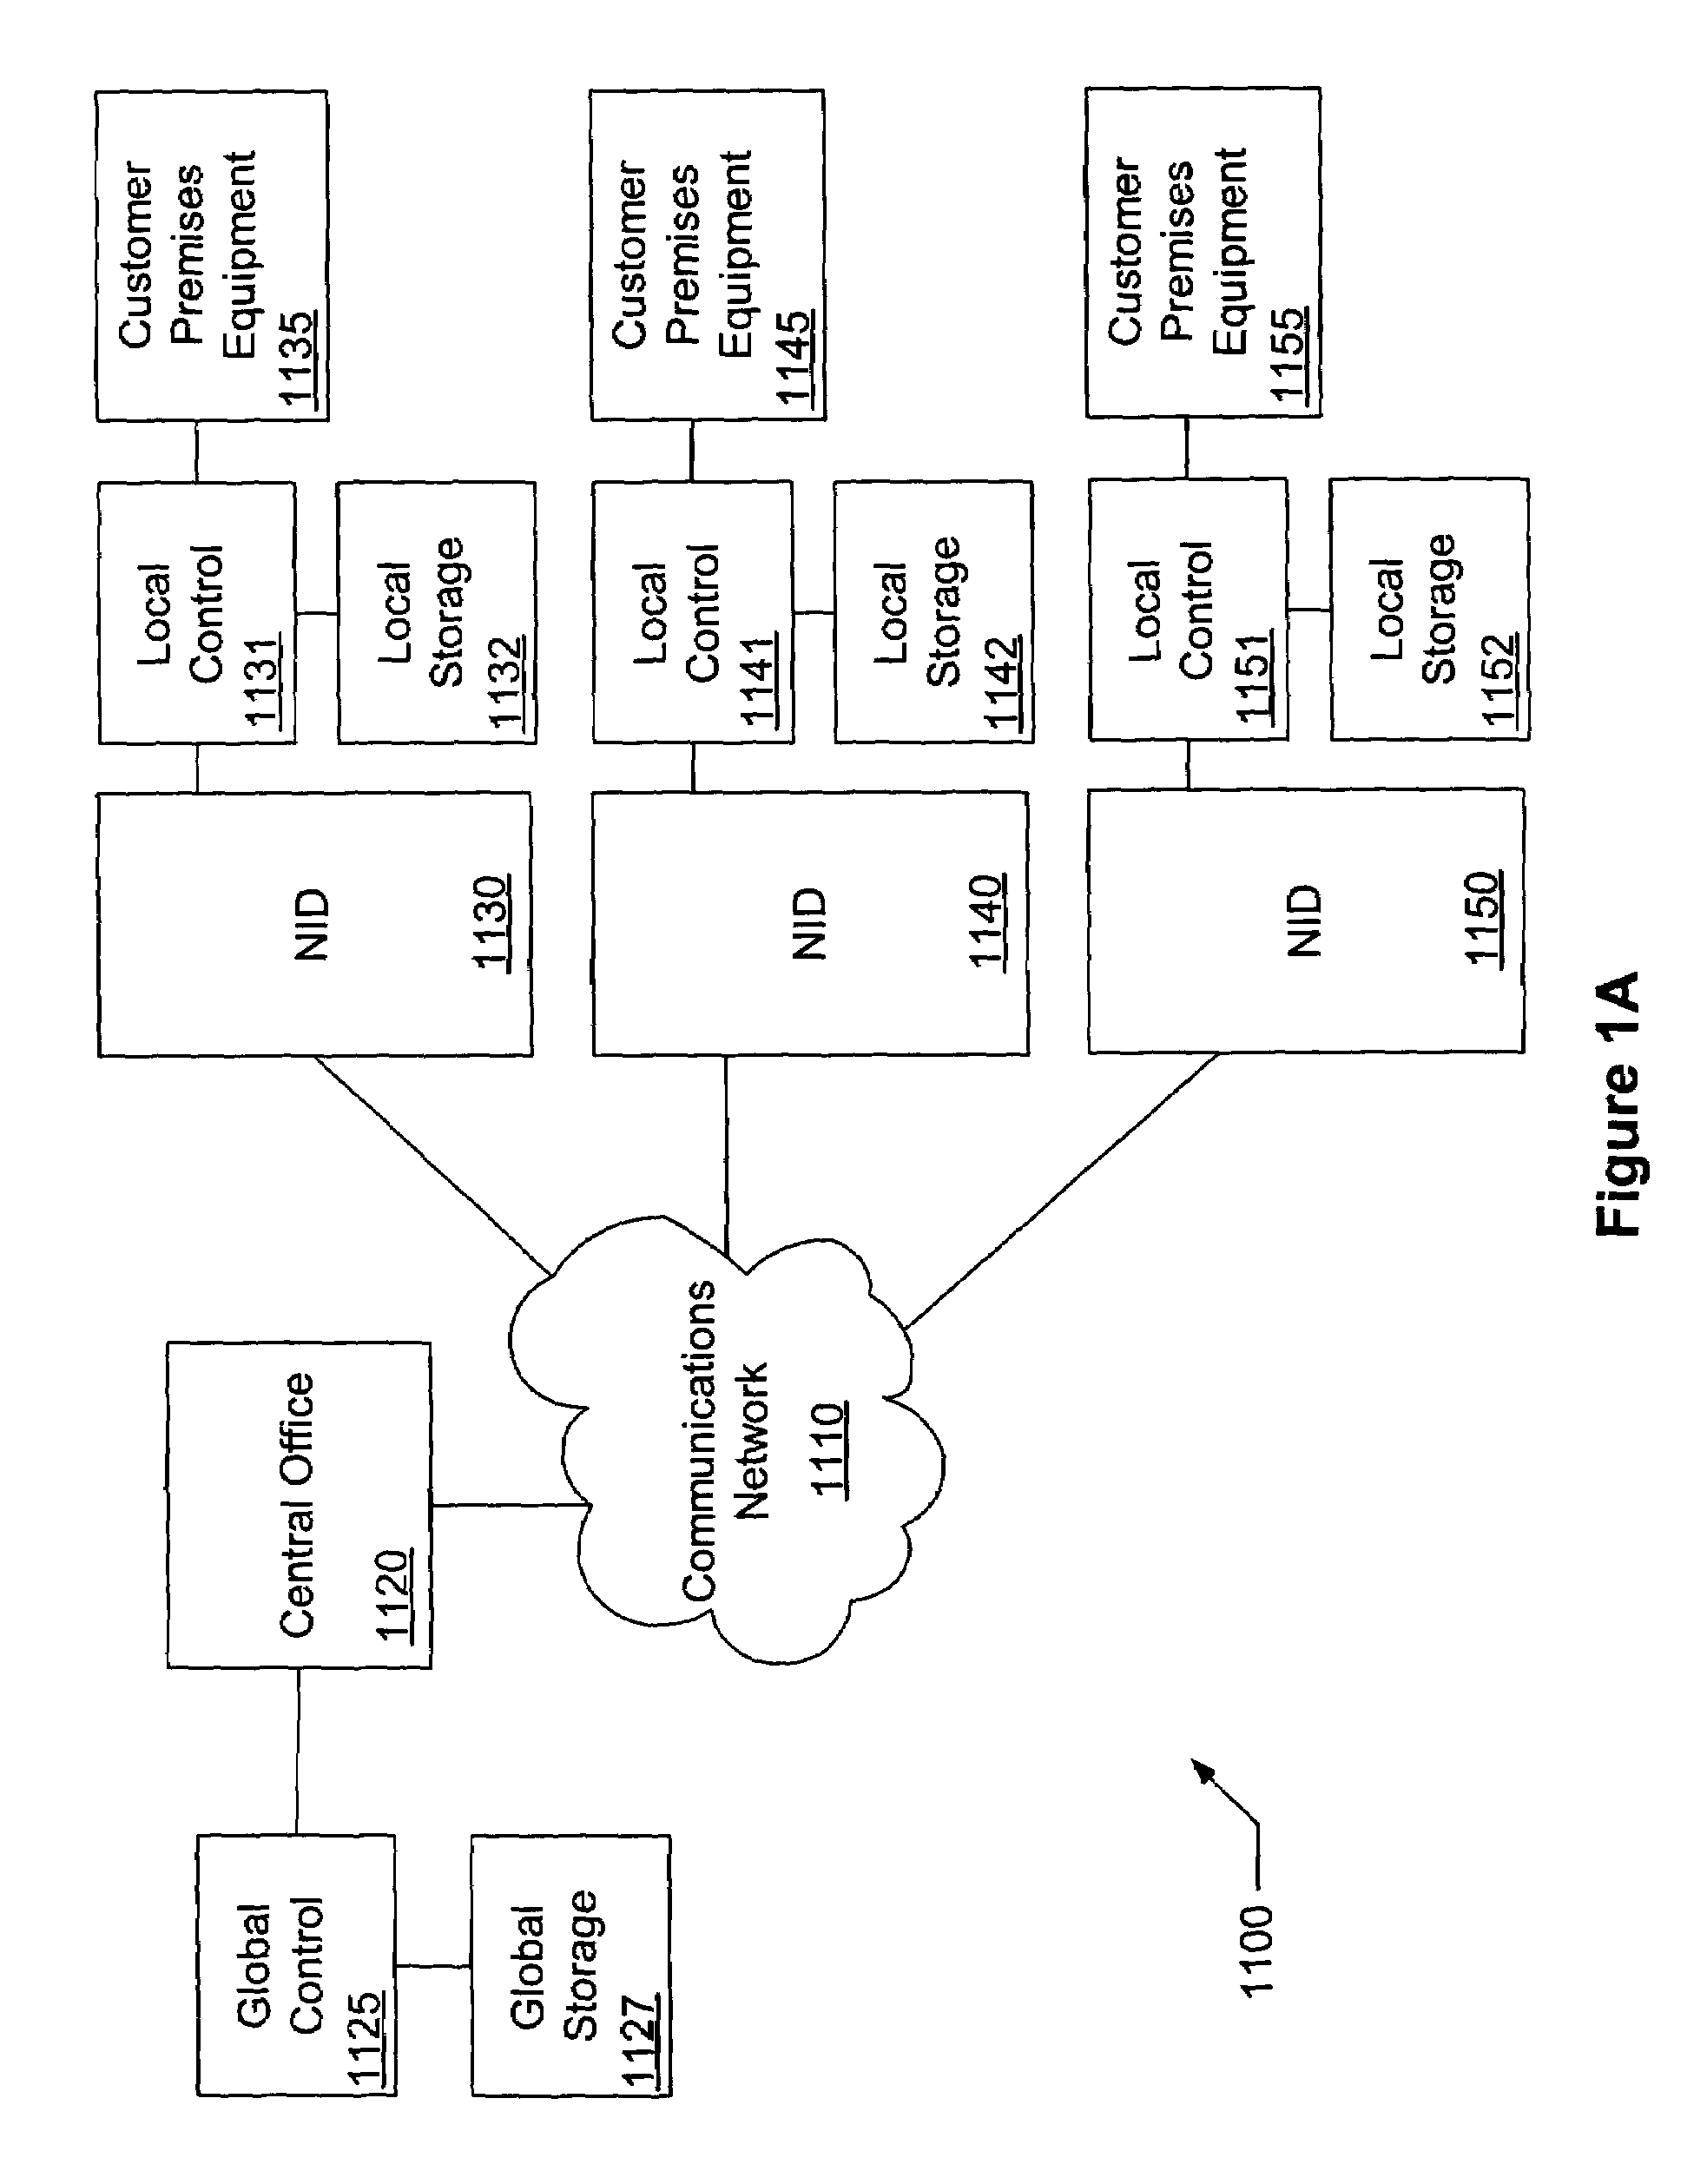 Systems and methods for distributing content objects in a telecommunication system